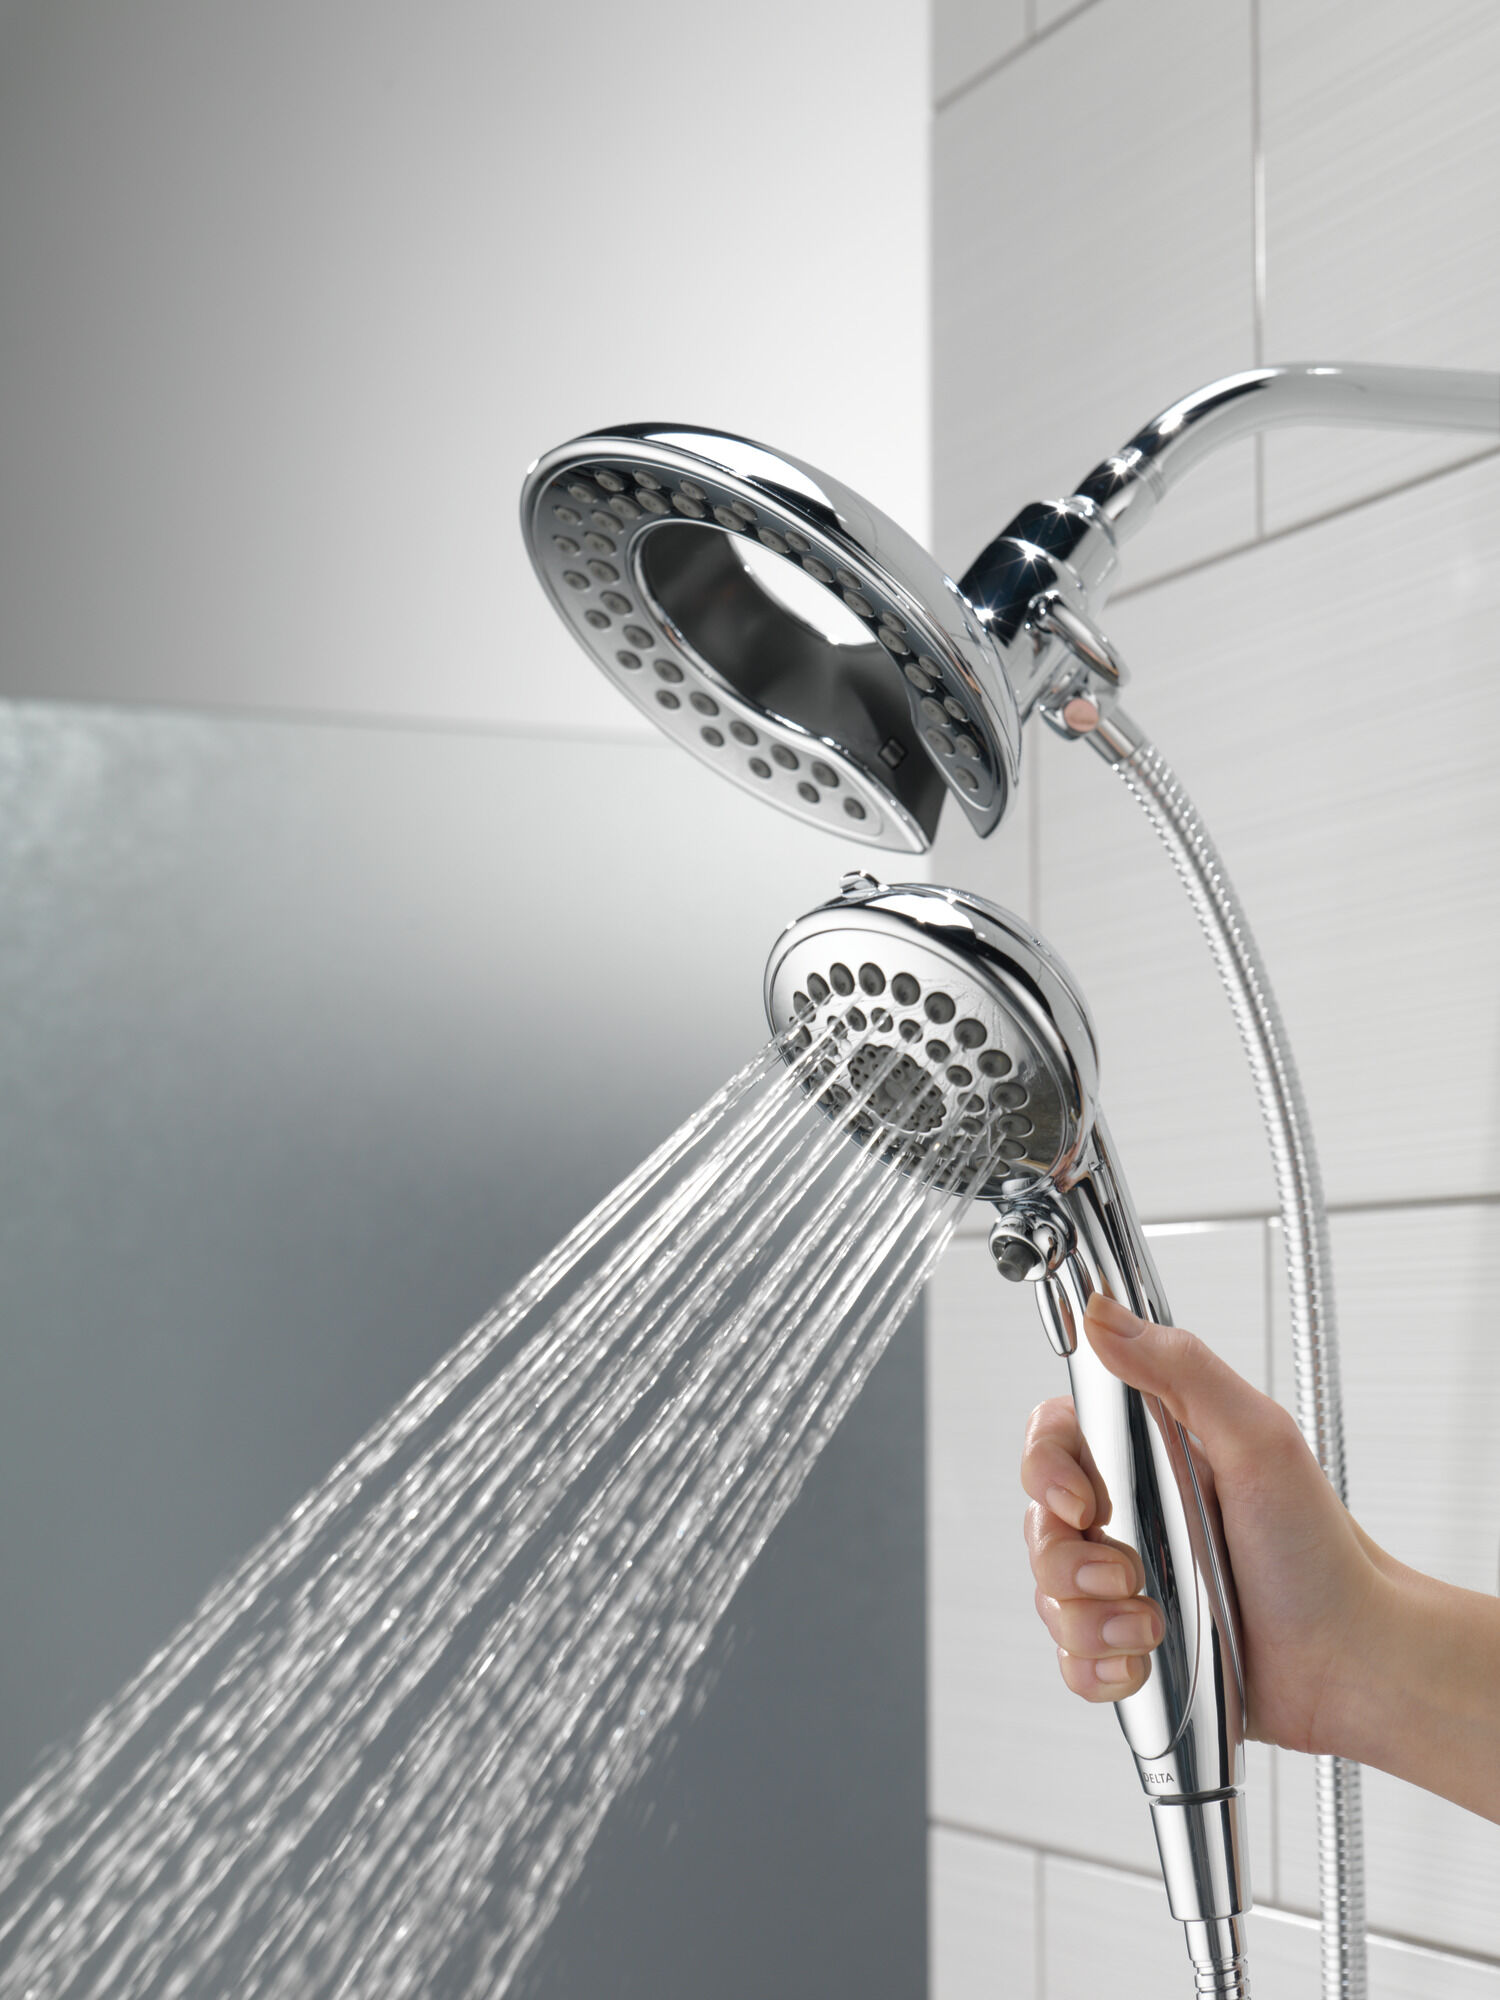 In2ition® 5-Setting Two-in-One Shower in Chrome 58569-PK | Delta